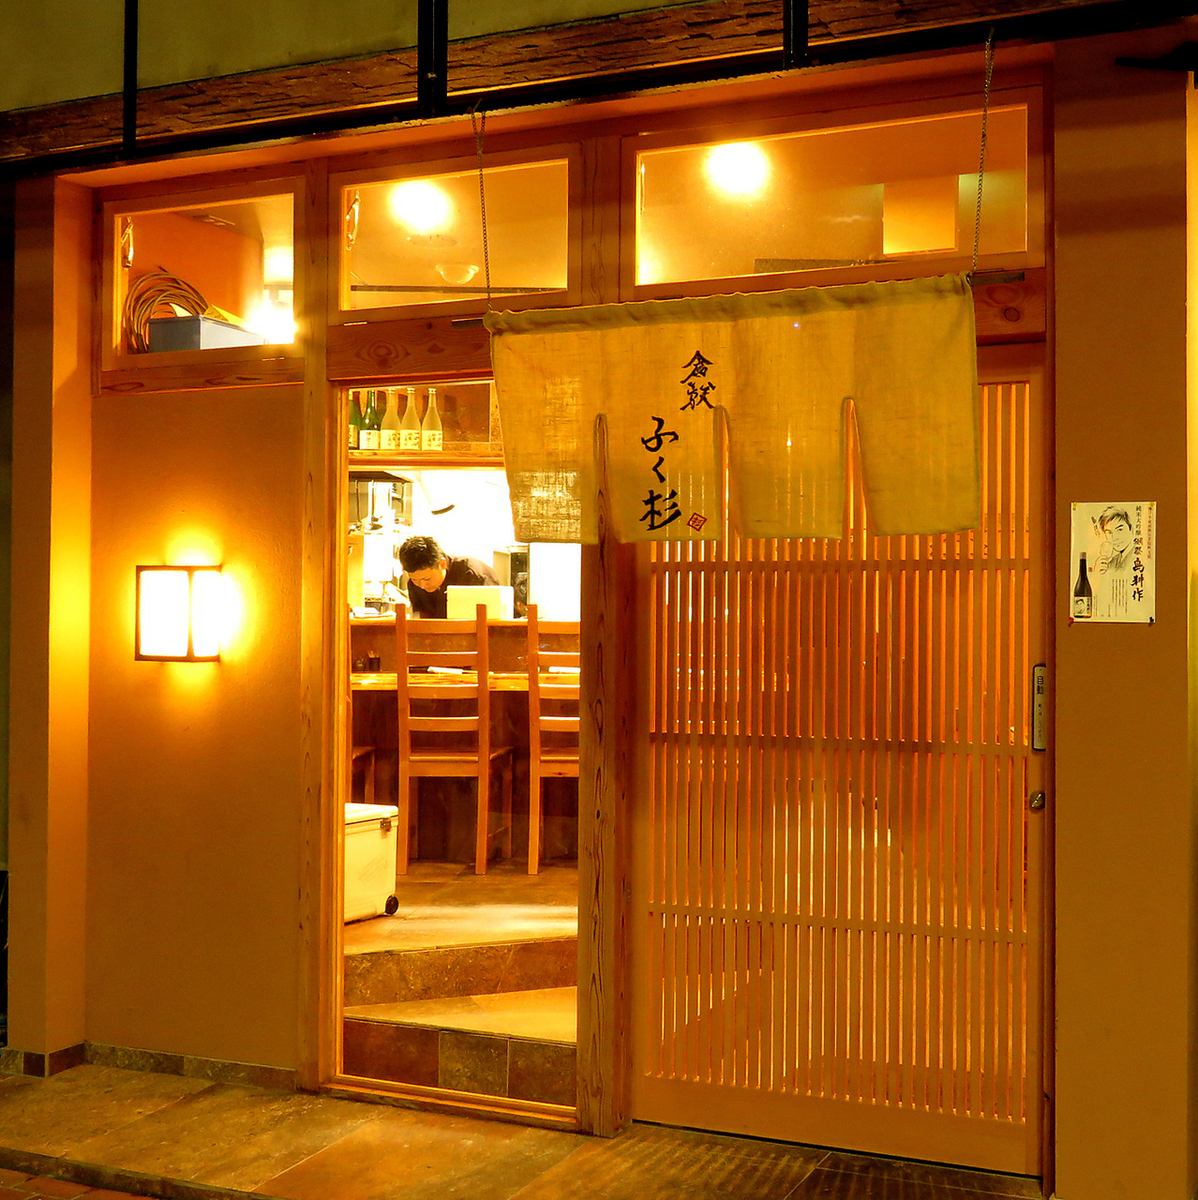 A good location, a 5-minute walk from Kurashiki Station. A calm atmosphere in a detached house.